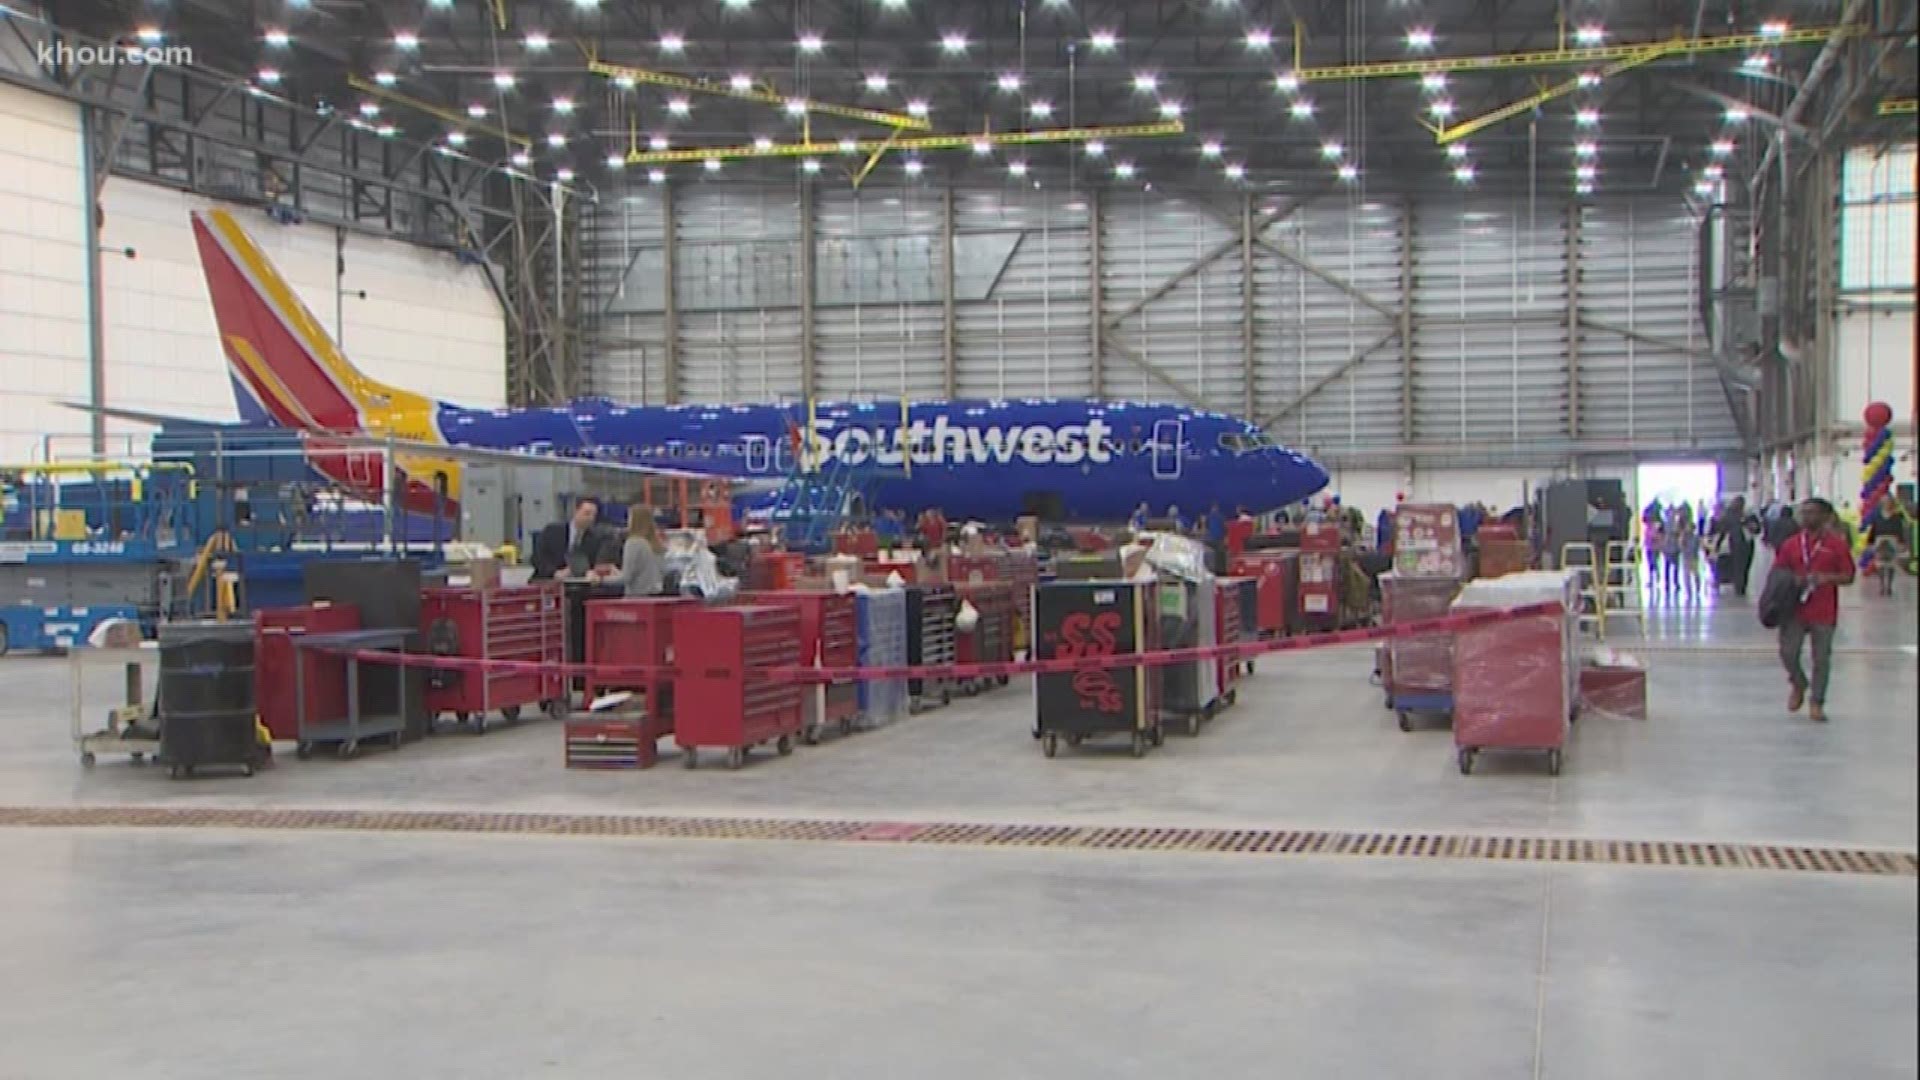 Southwest Airlines opened it largest maintenance hanger at Hobby Airport. The facility is supposed to make flying out of the airport more reliable, the CEO says.